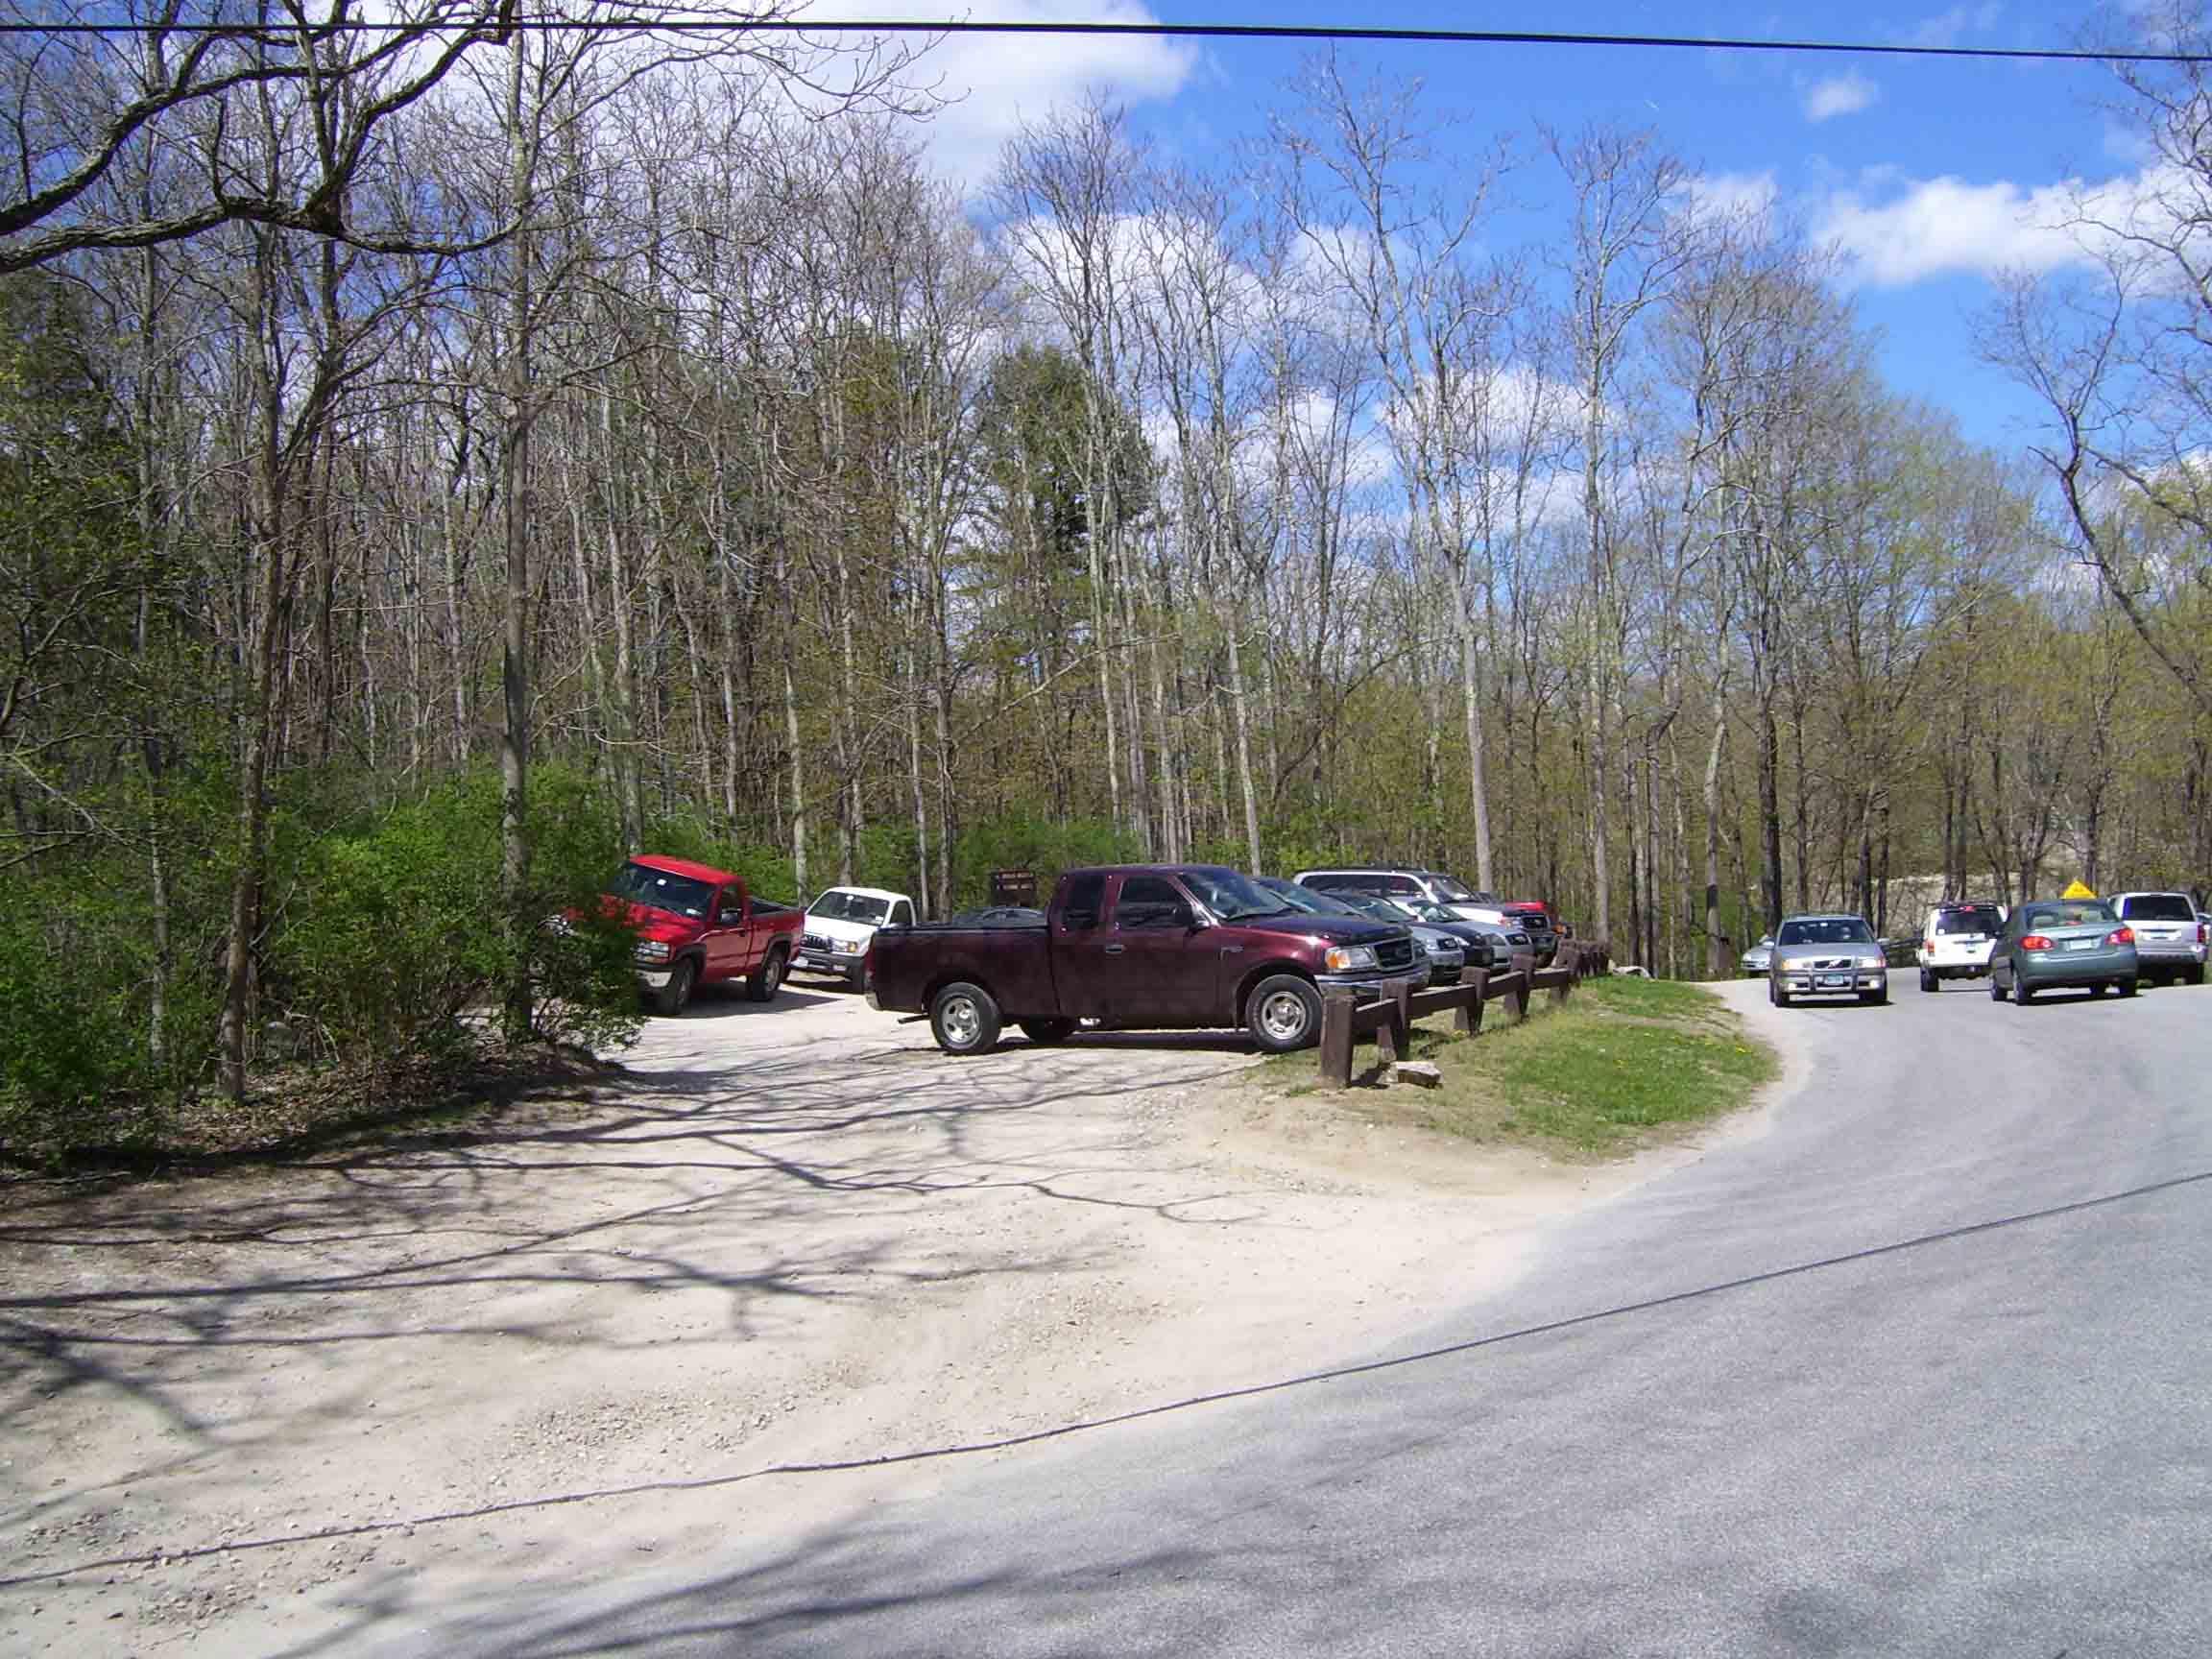 Main Parking lot at Bull's Bridge on a beautiful spring afternoon. (See mile 7.9). Update (2013). This parking lot is now closed. There is a parking area just to the west of US 7.  Courtesy dlcul@conncoll.edu